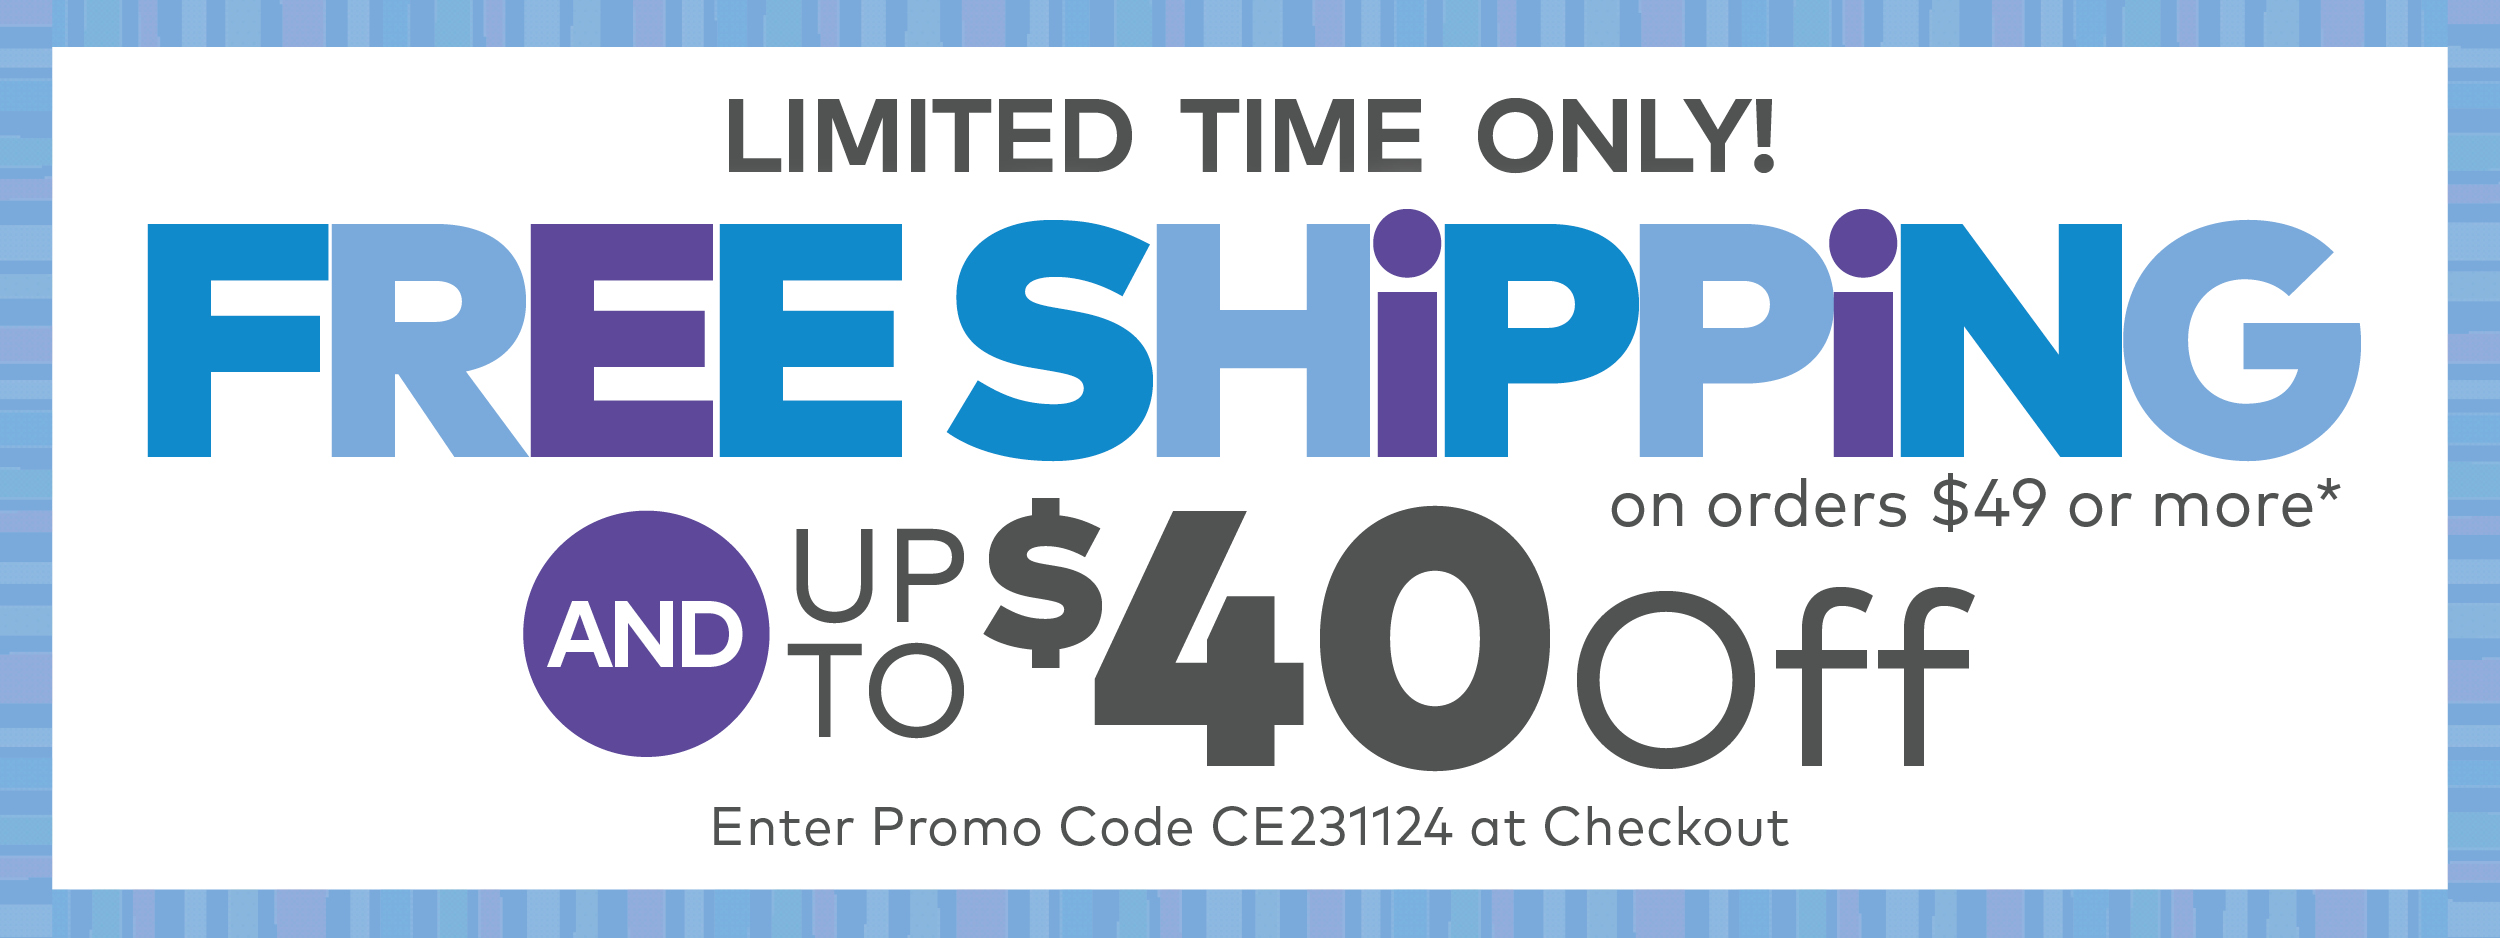 Free Shipping on orders $49 or more* Plus up to $40 off*